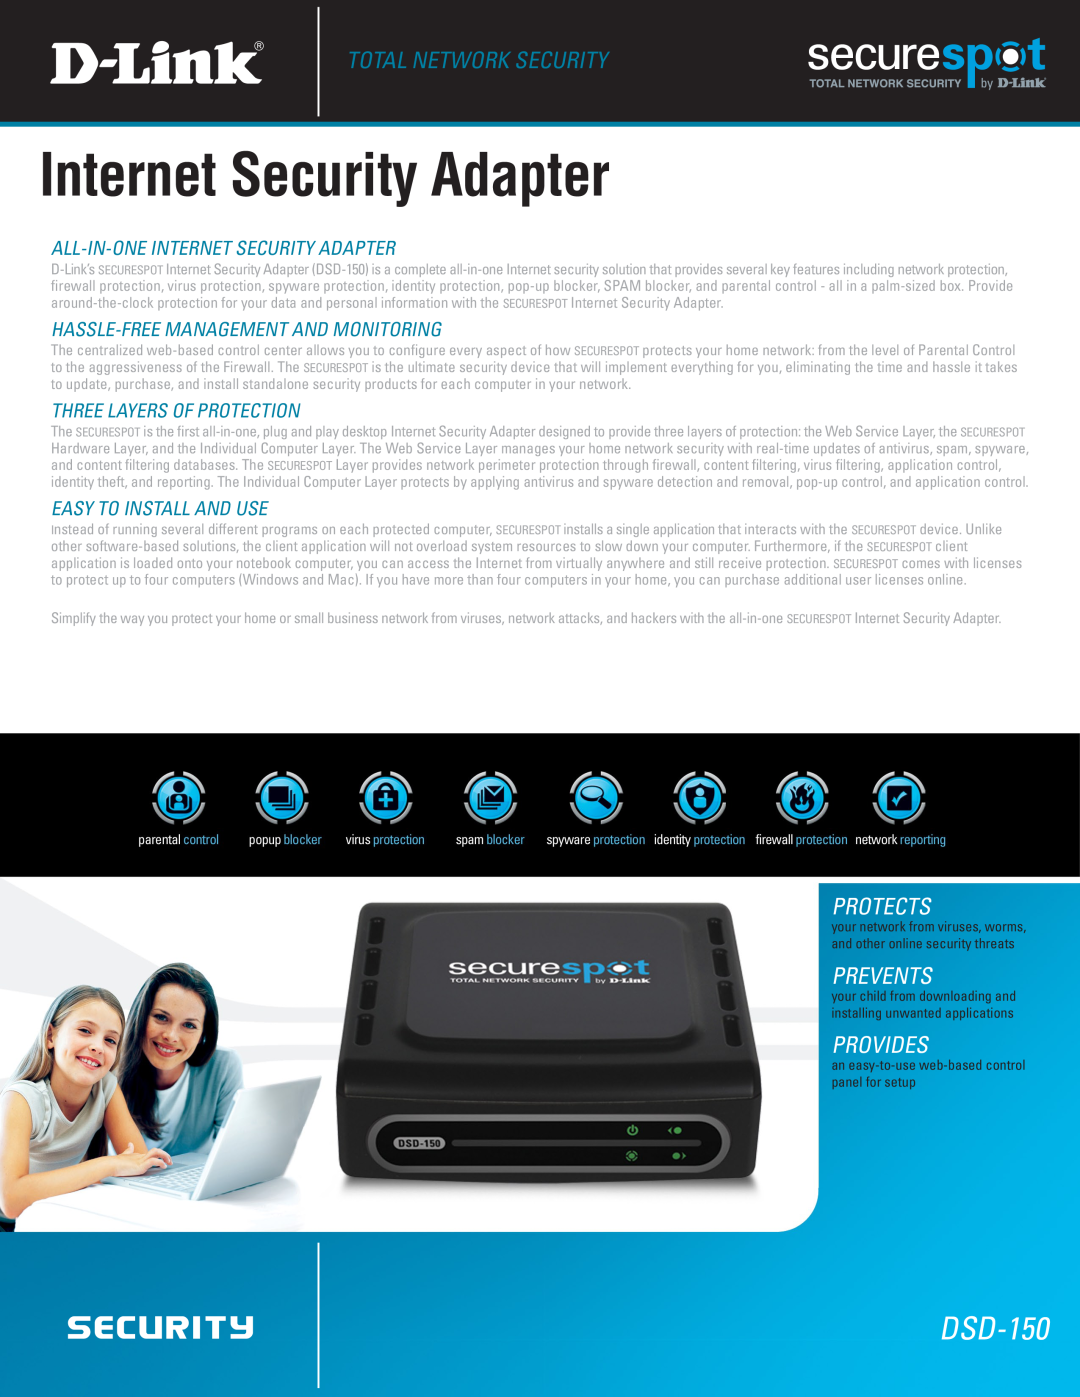 D-Link DSD-150 manual Internet Security Adapter, Total Network Security, Protects, Prevents, Provides 